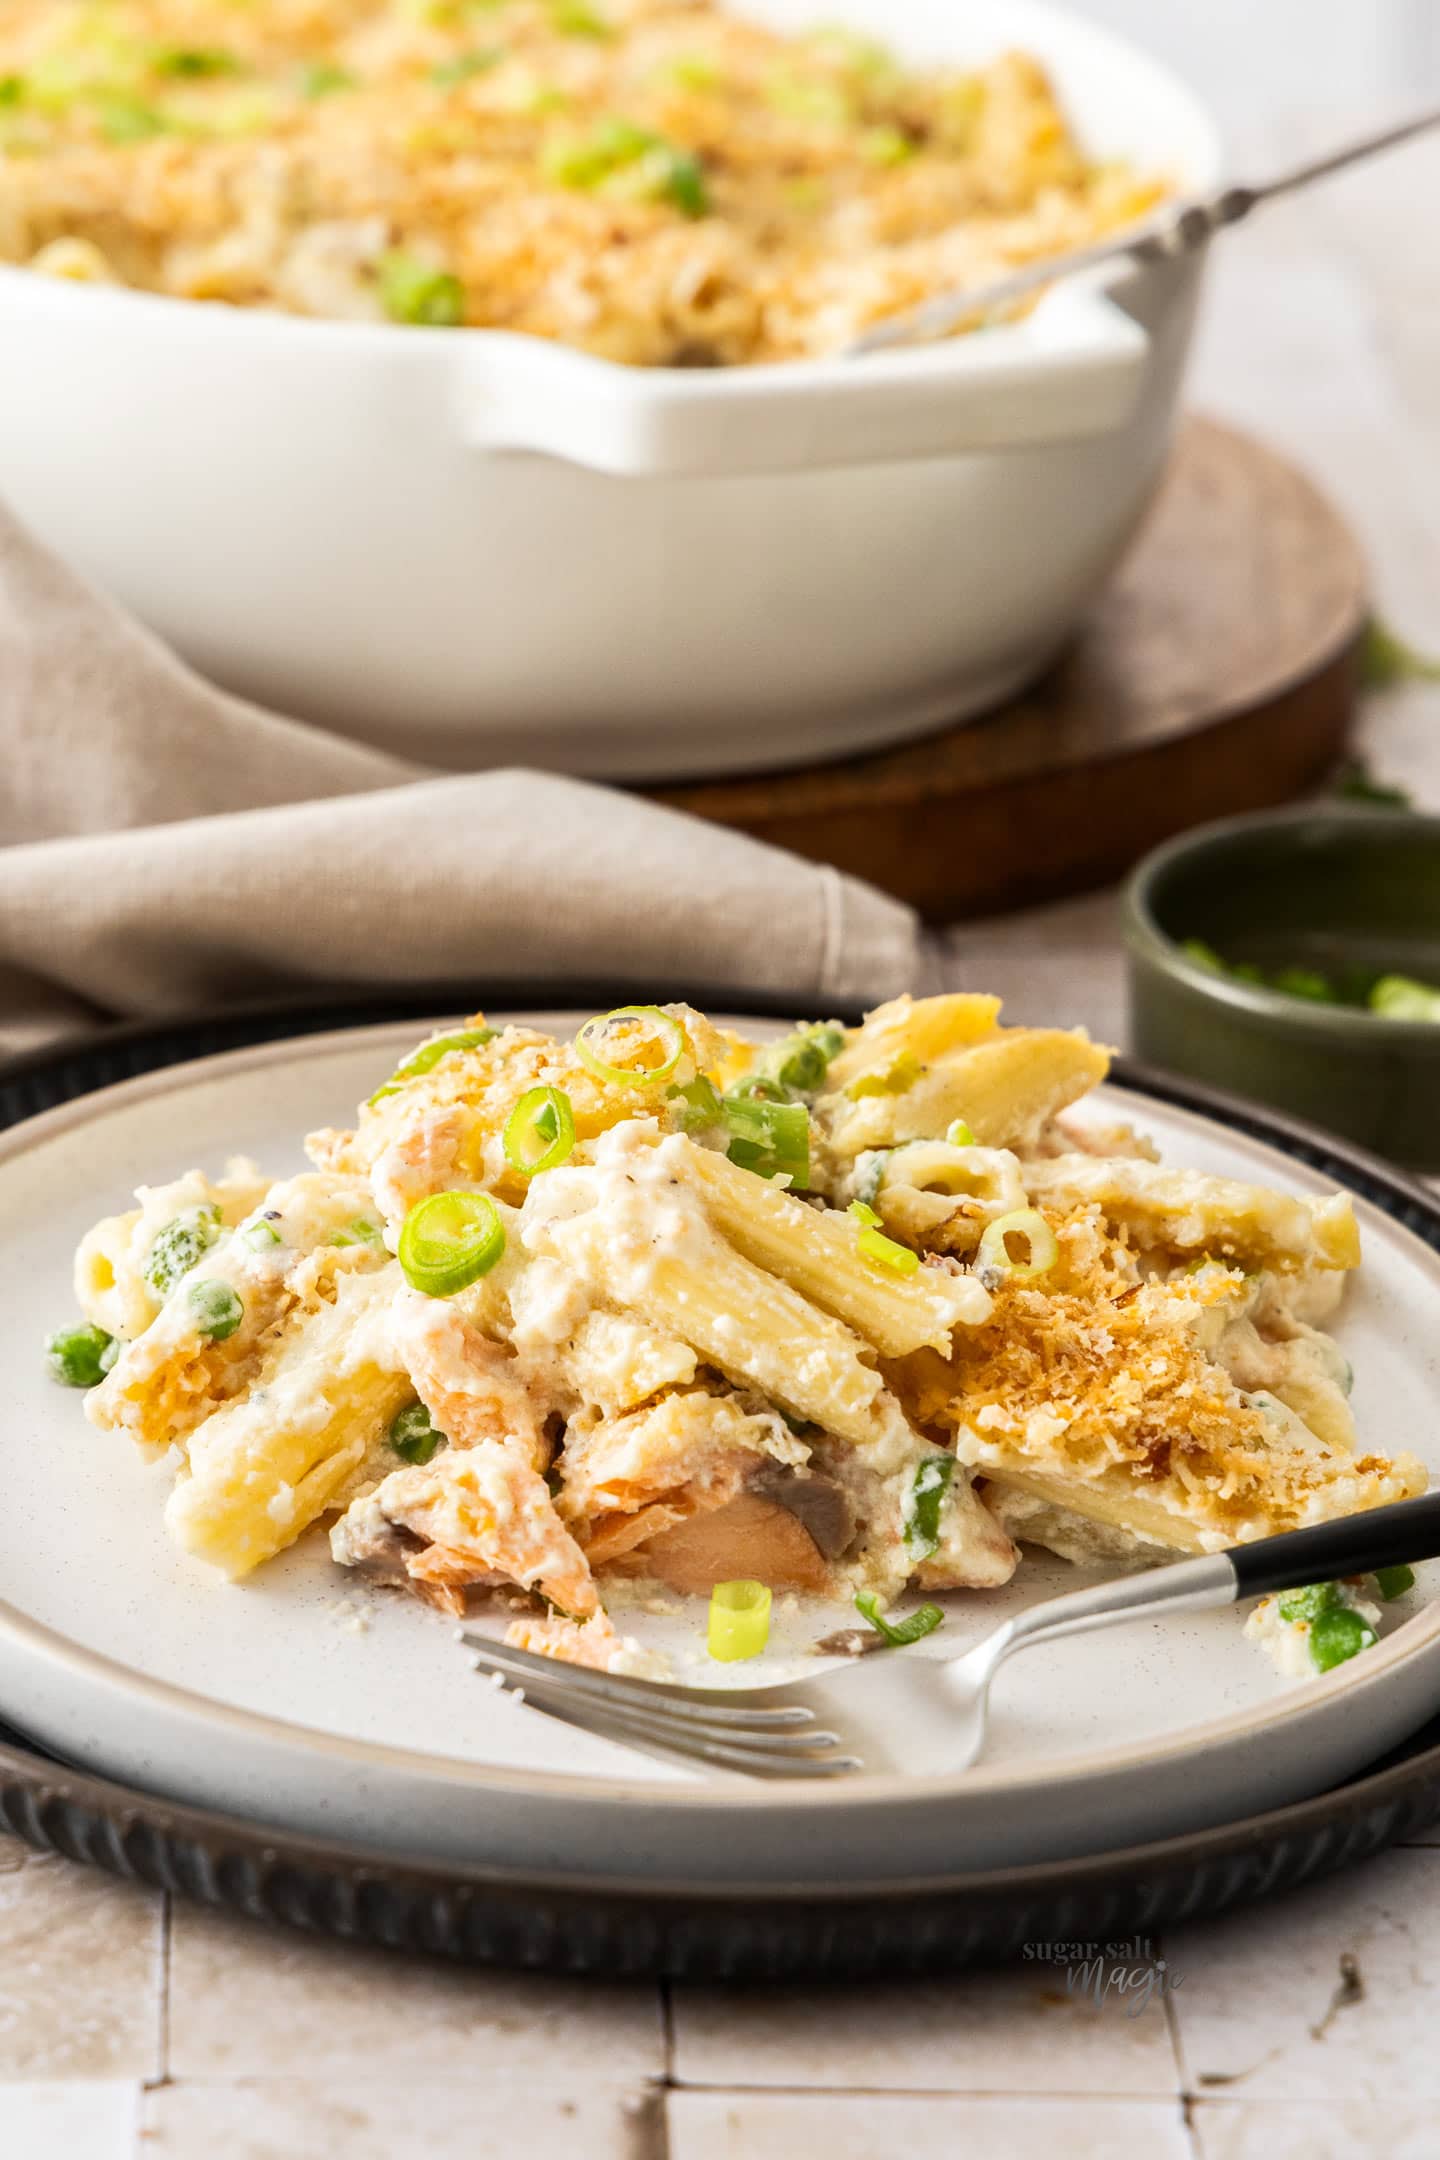 A serve of baked salmon pasta on a dinner plate.